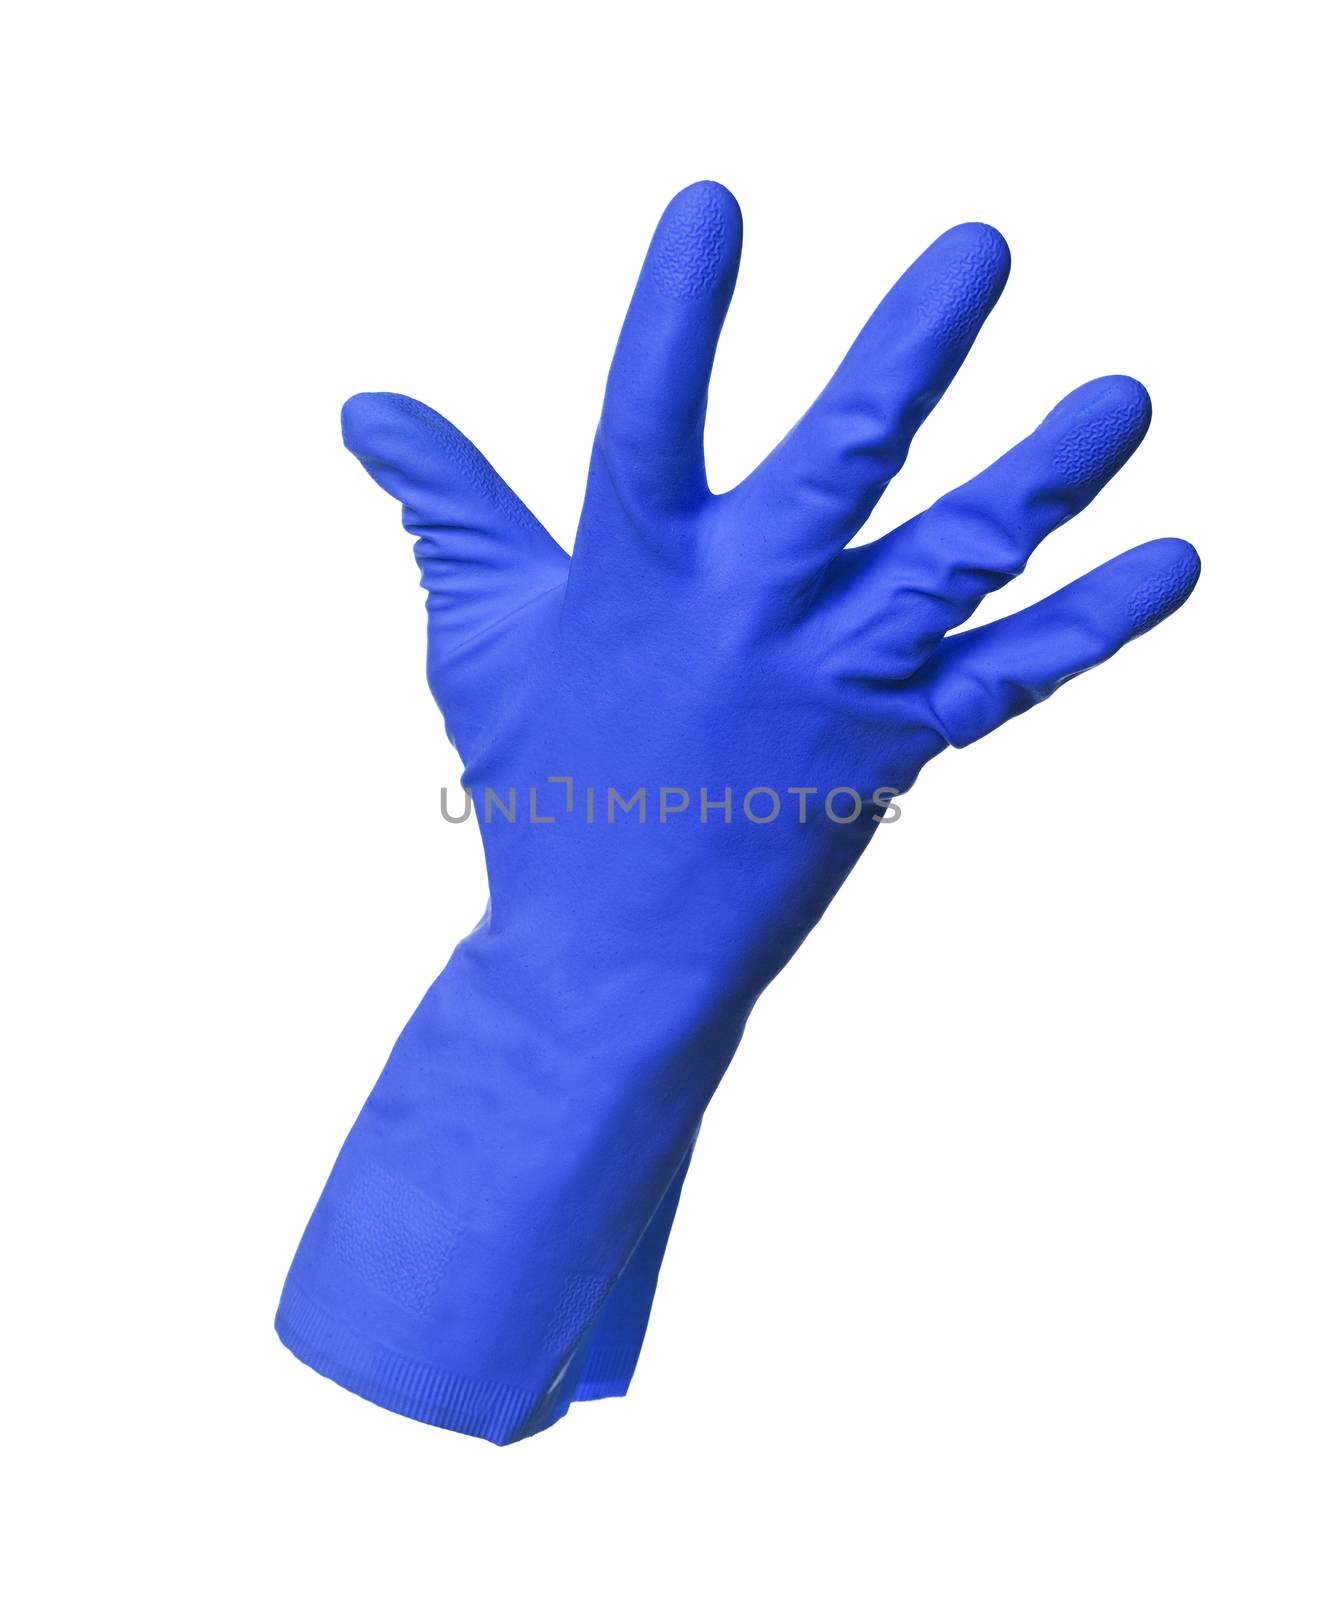 Blue protection glove isolated on white background by gemenacom